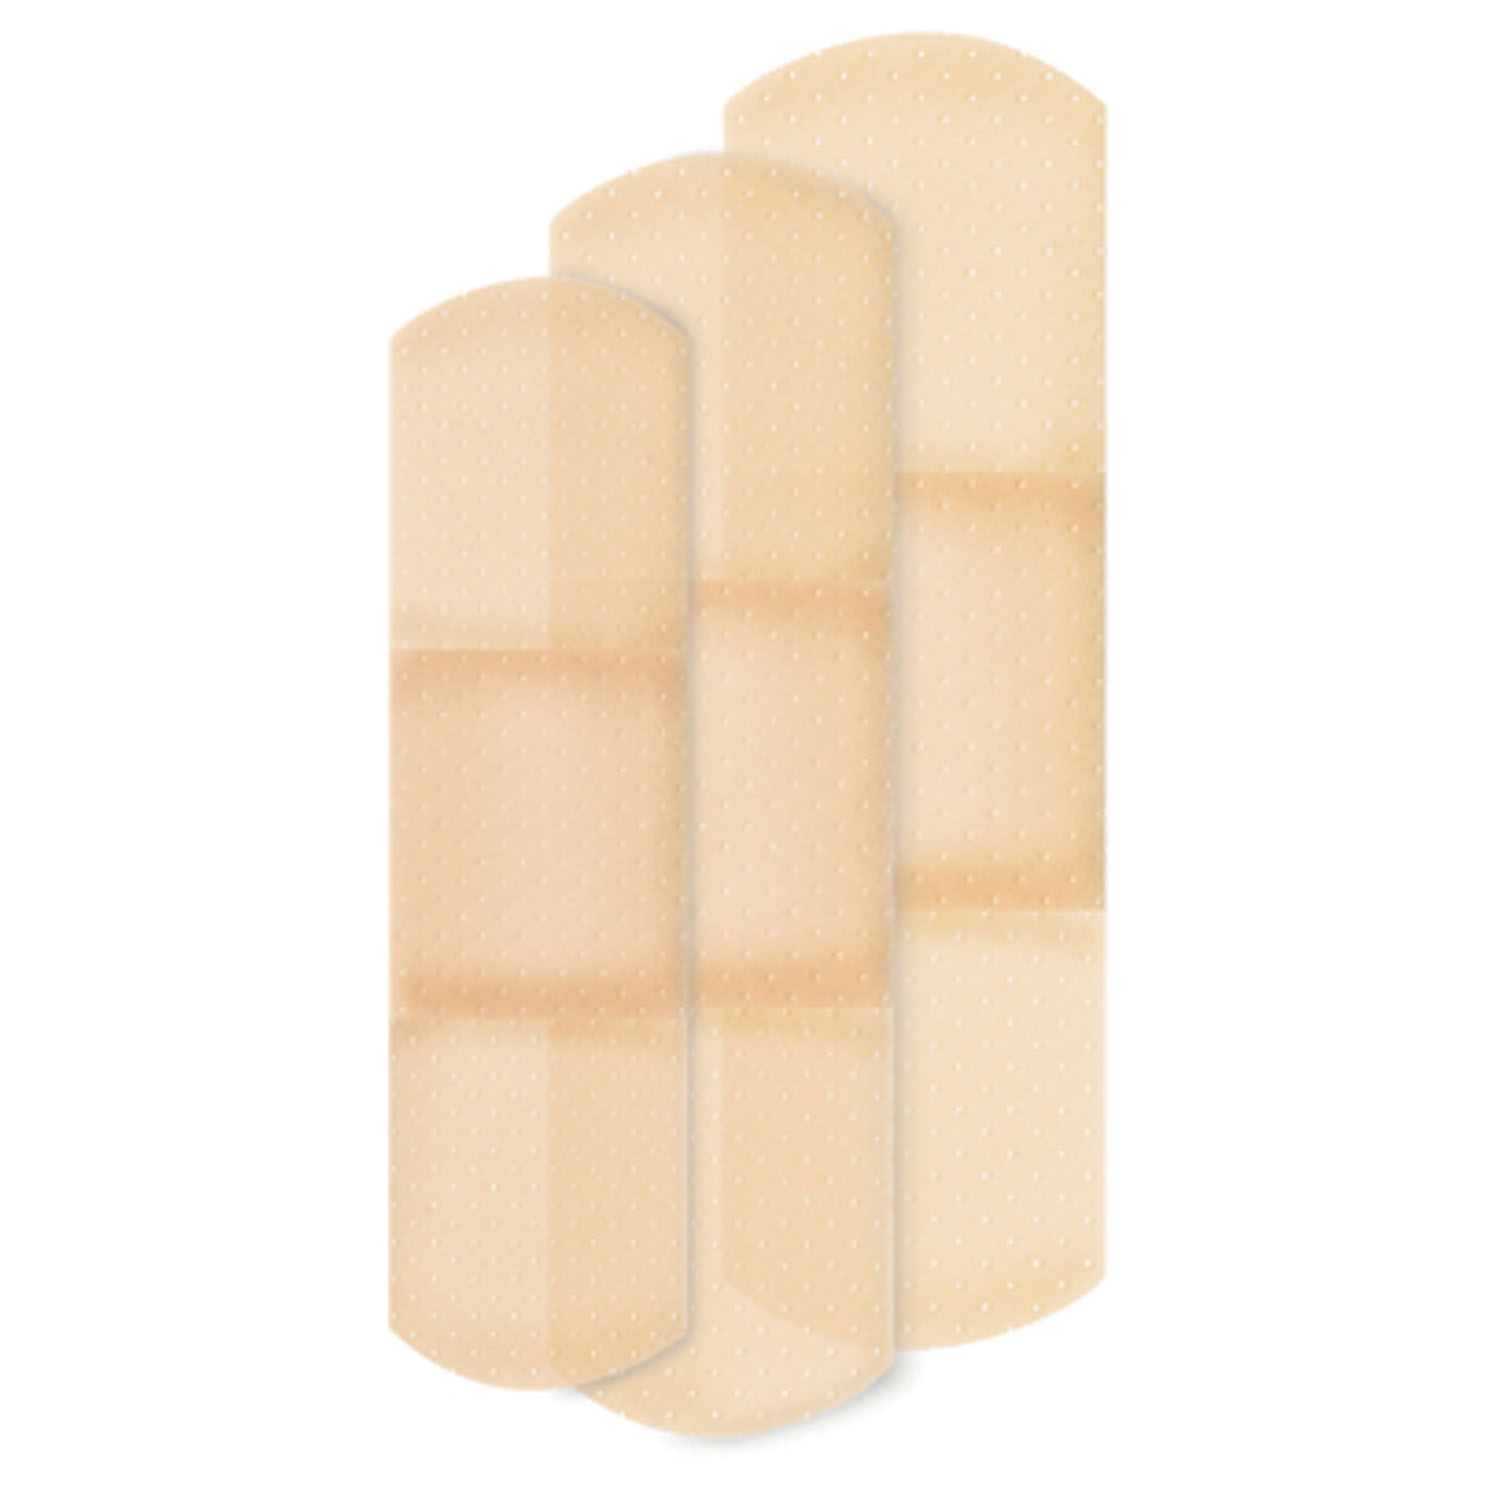 DUKAL FIRST AID SHEER ADHESIVE BANDAGES : 1260033 BX          $2.49 Stocked